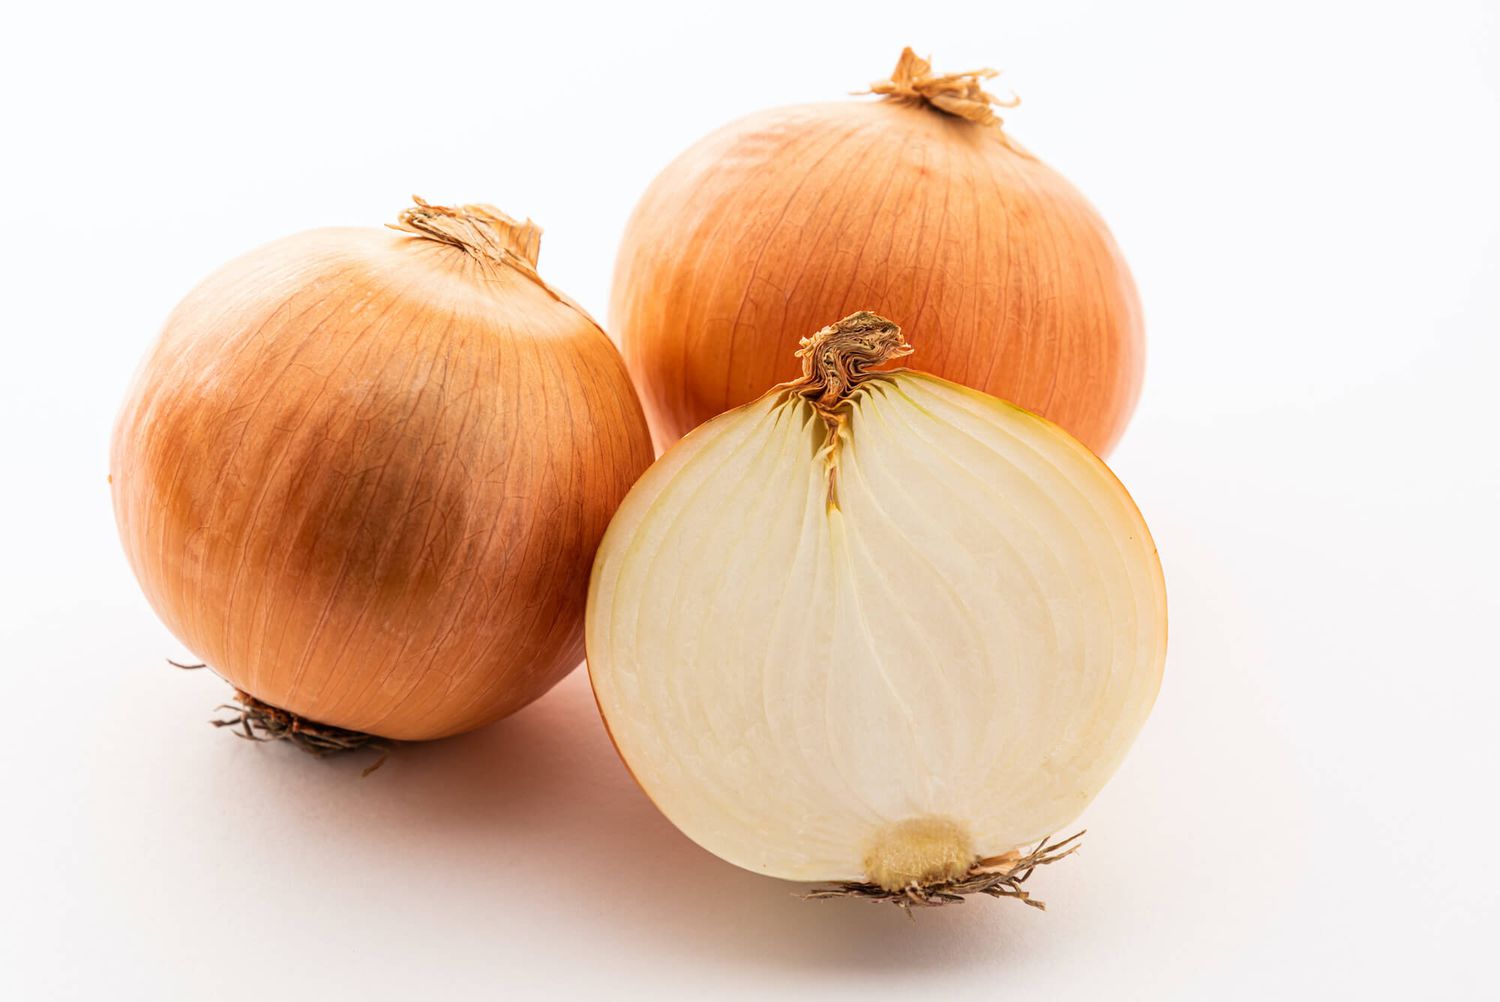 How To Store Leftover Onion